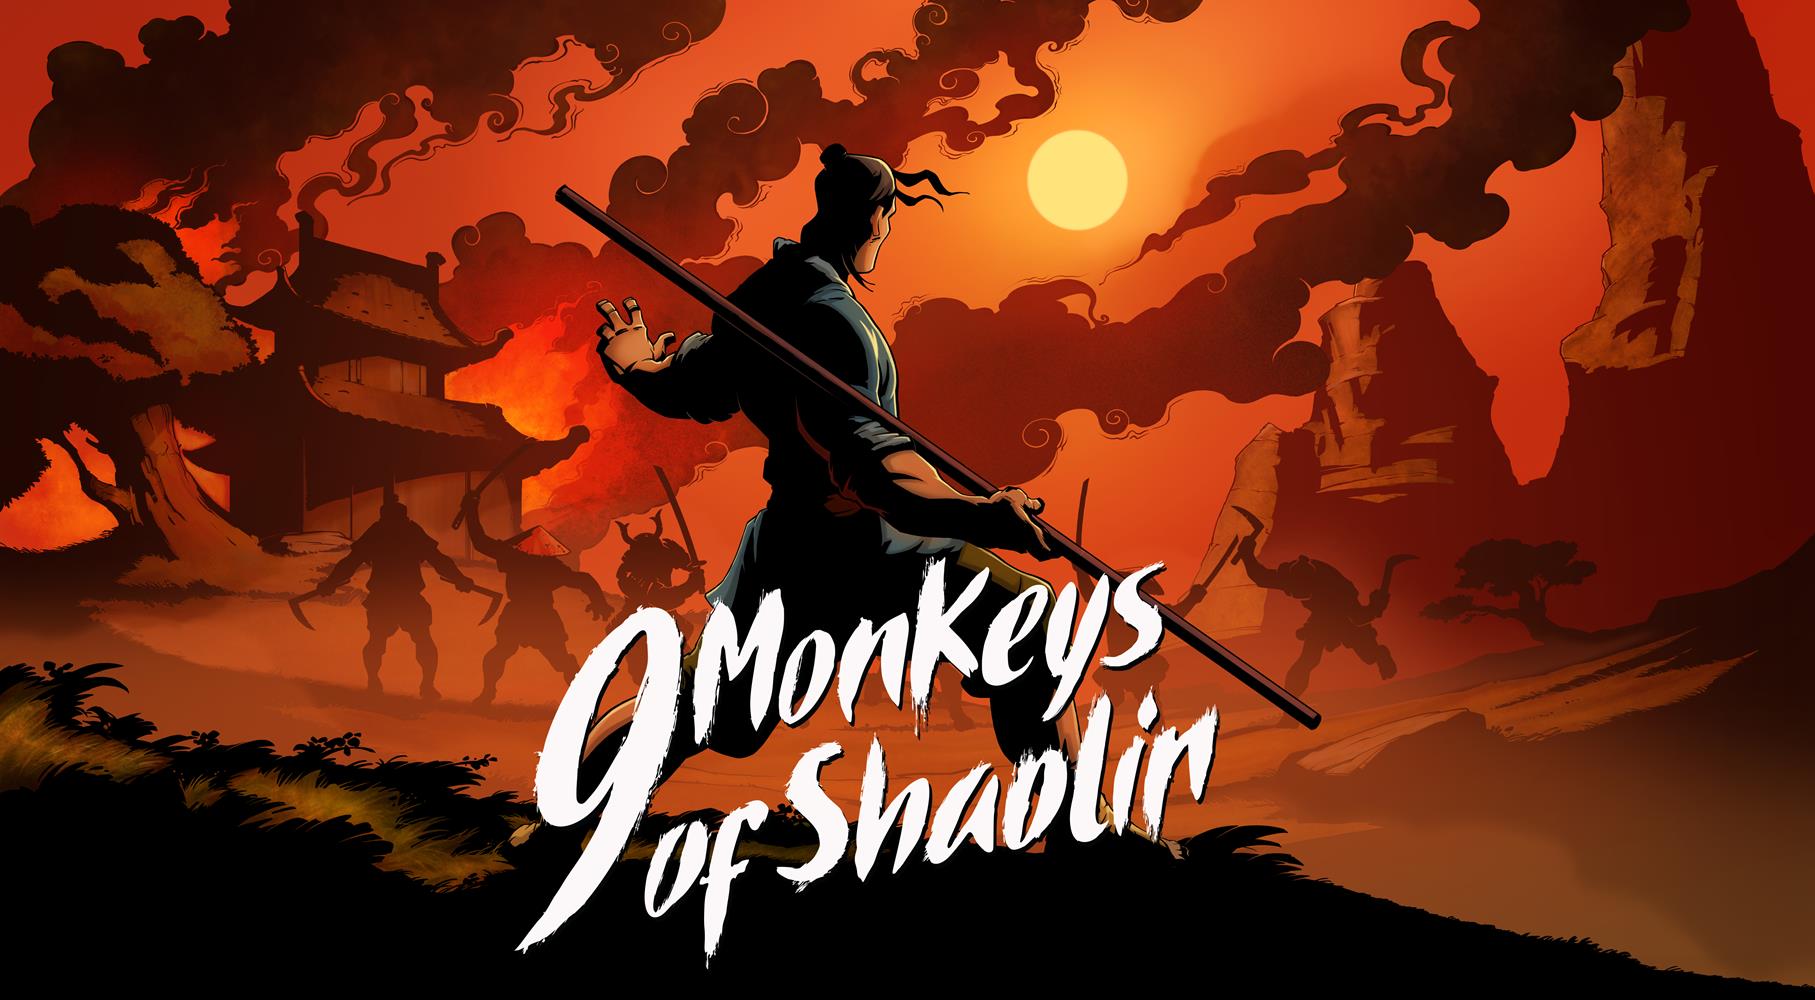 Image for 9 Monkeys of Shaolin, As Far as the Eye and more indies we're excited about this week